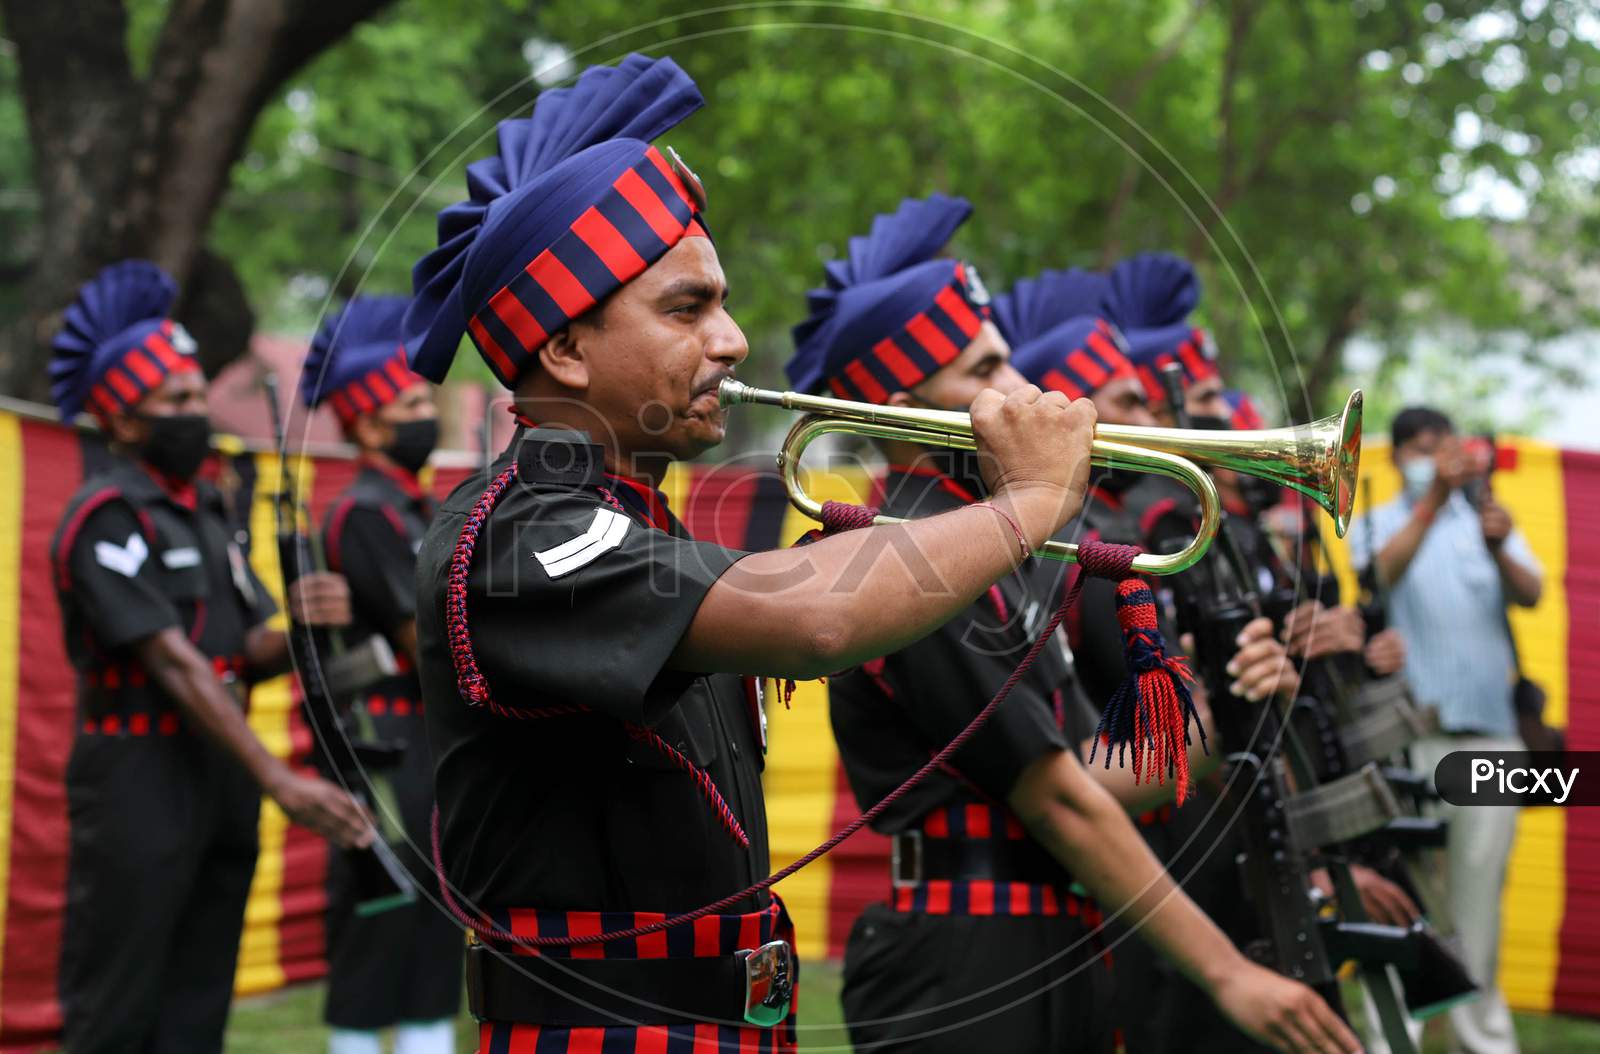 Indian Army Jawans paying official rites at the funeral of  N K Deepak Singh, An Indian Soldier Who Was Killed In A Border Clash With Chinese Troops In Ladakh Region, At Military Hospital In Prayagraj, June 19, 2020.